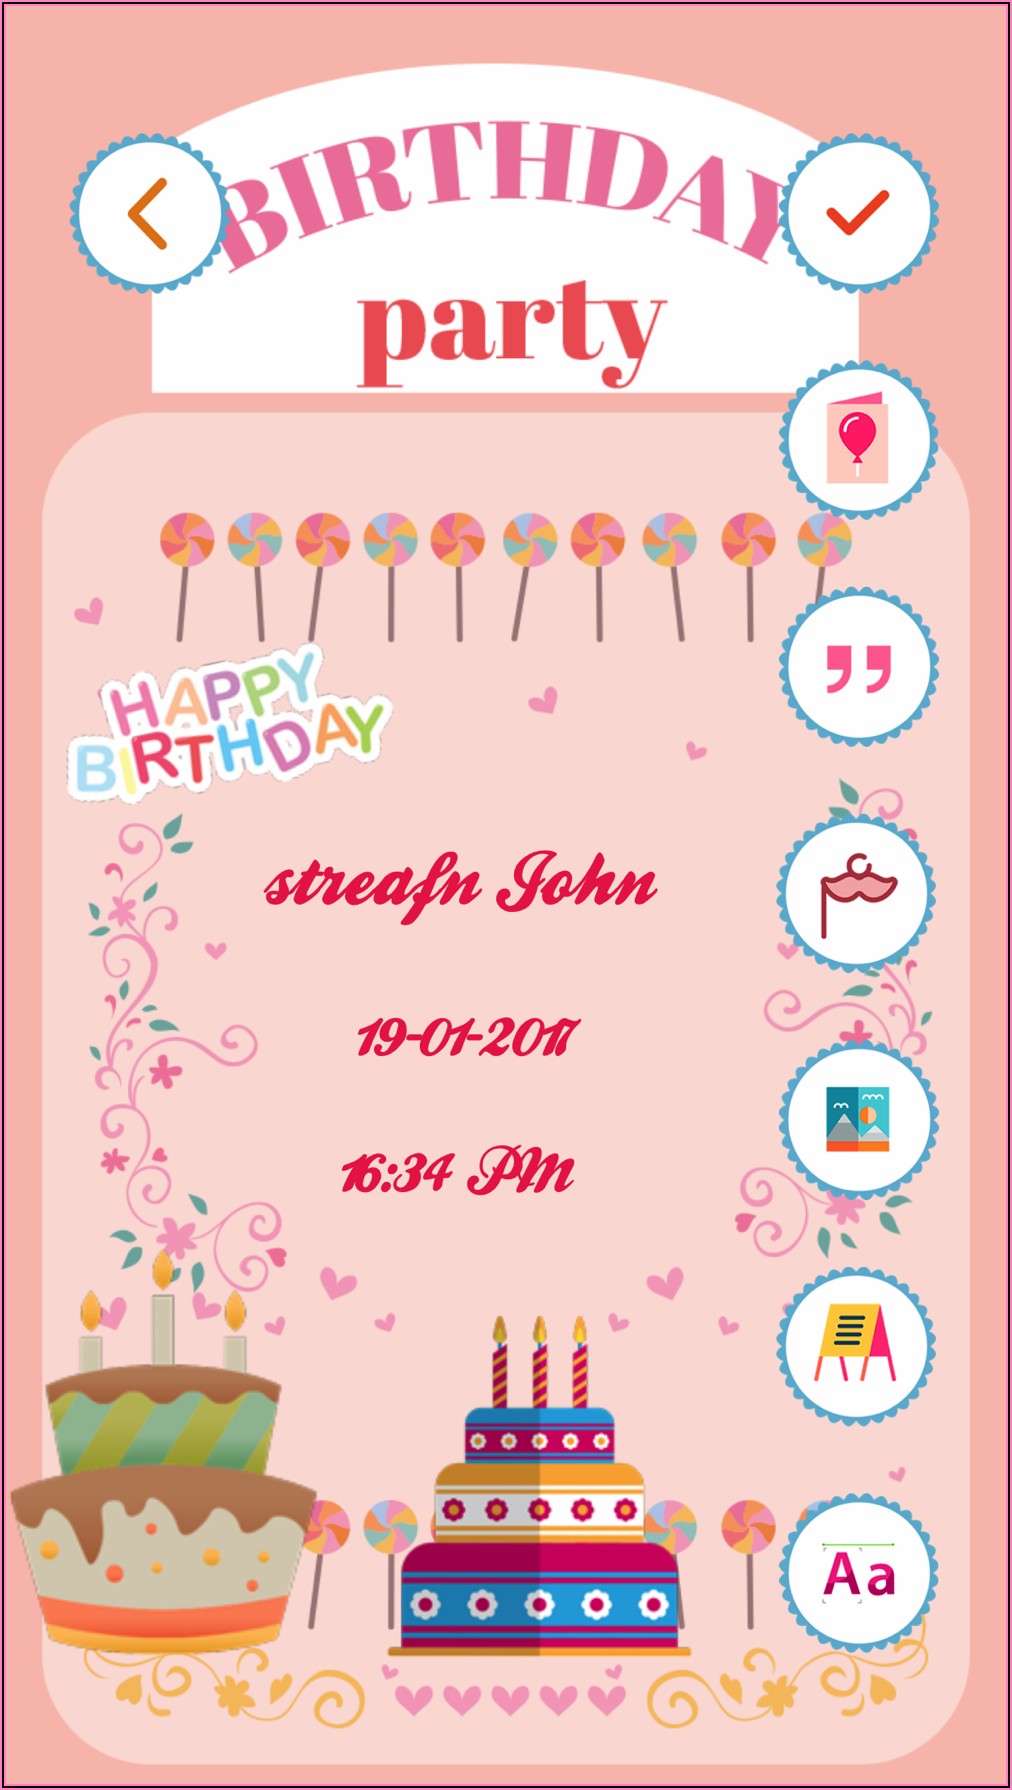 Invitation Card For Birthday Free Download